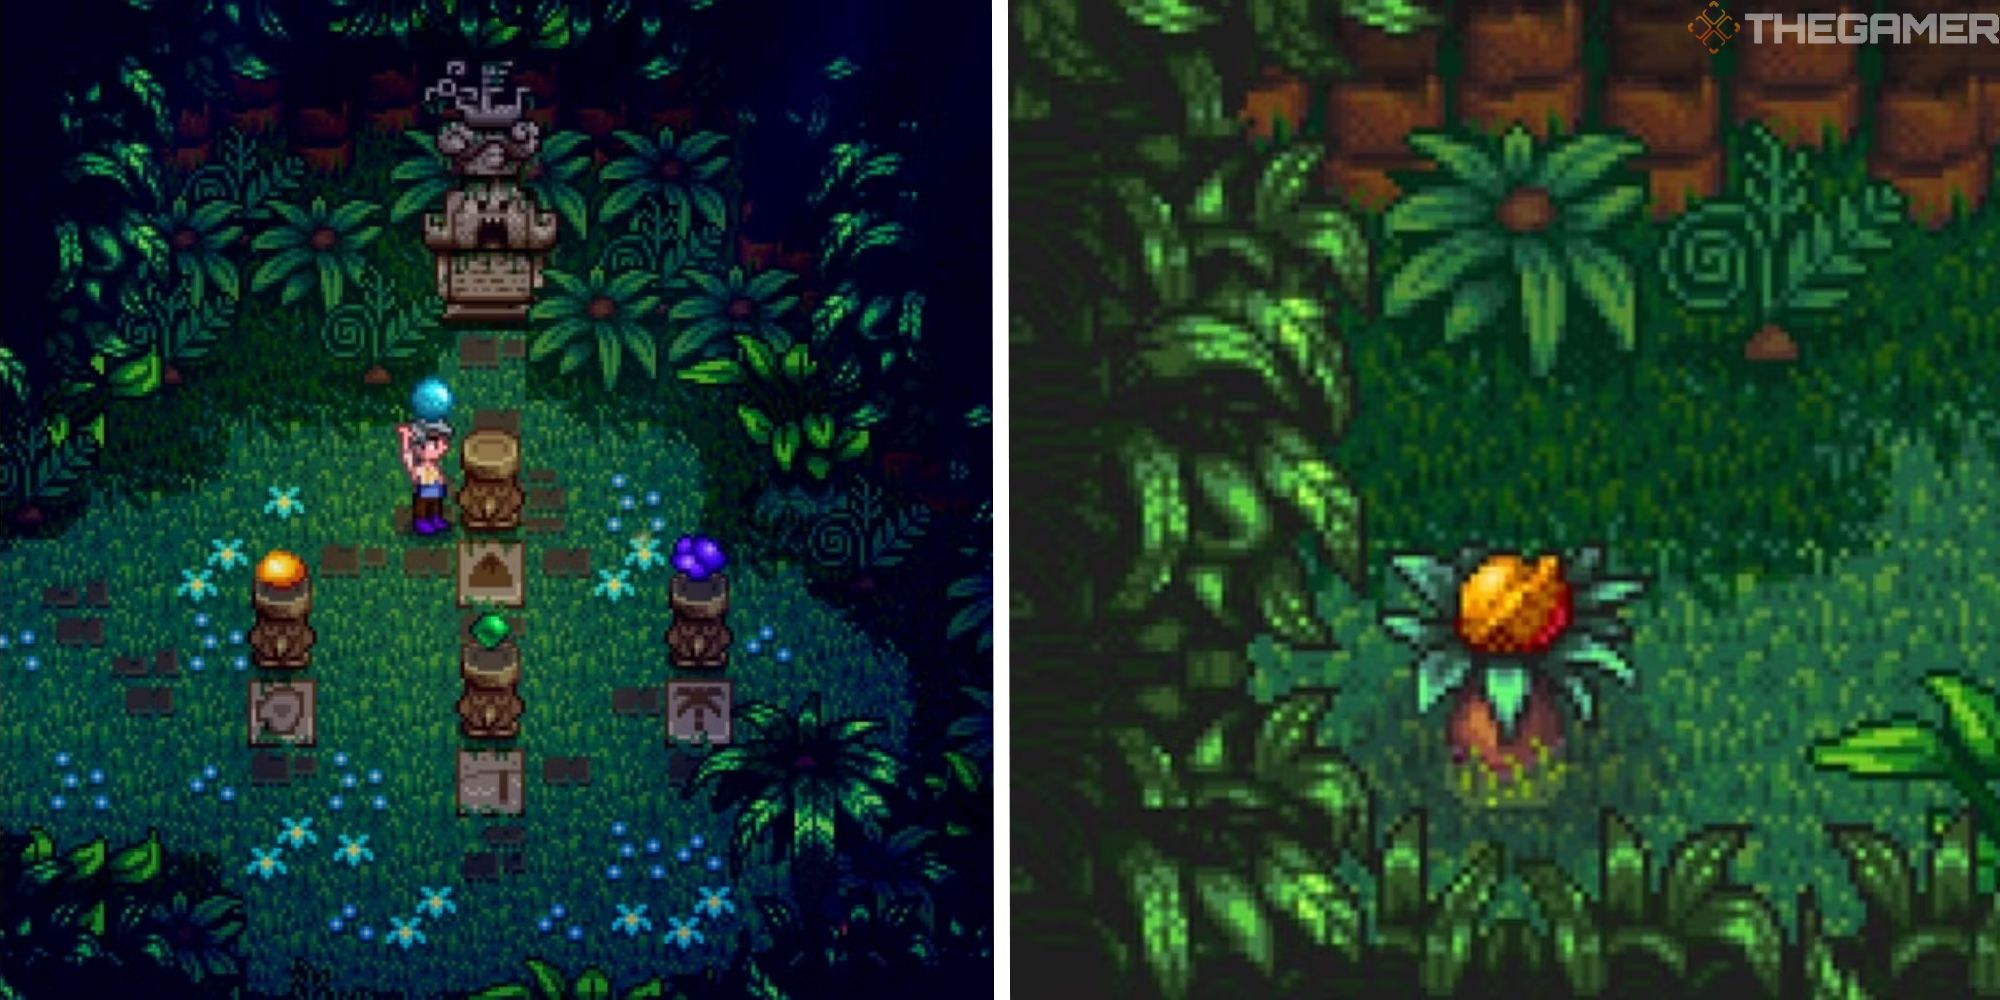 split image showing player solving a puzzle, next to image of walnut bush